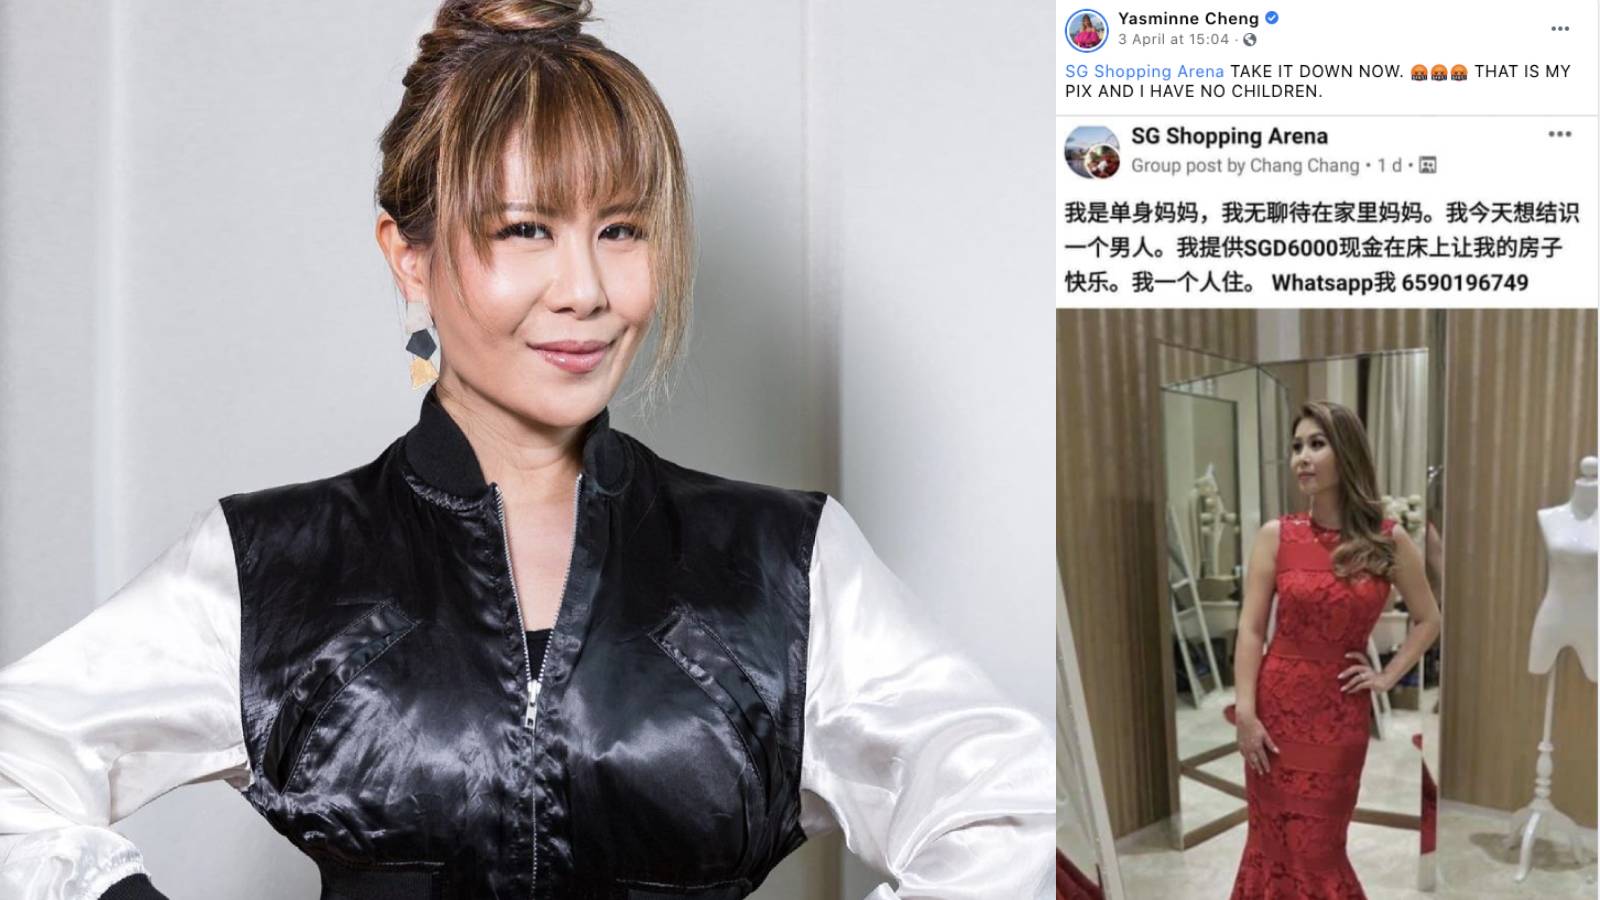 Yasminne Cheng Is Not “A Single Mum Who’s Lonely And Horny”... Despite What Online Ads Claim